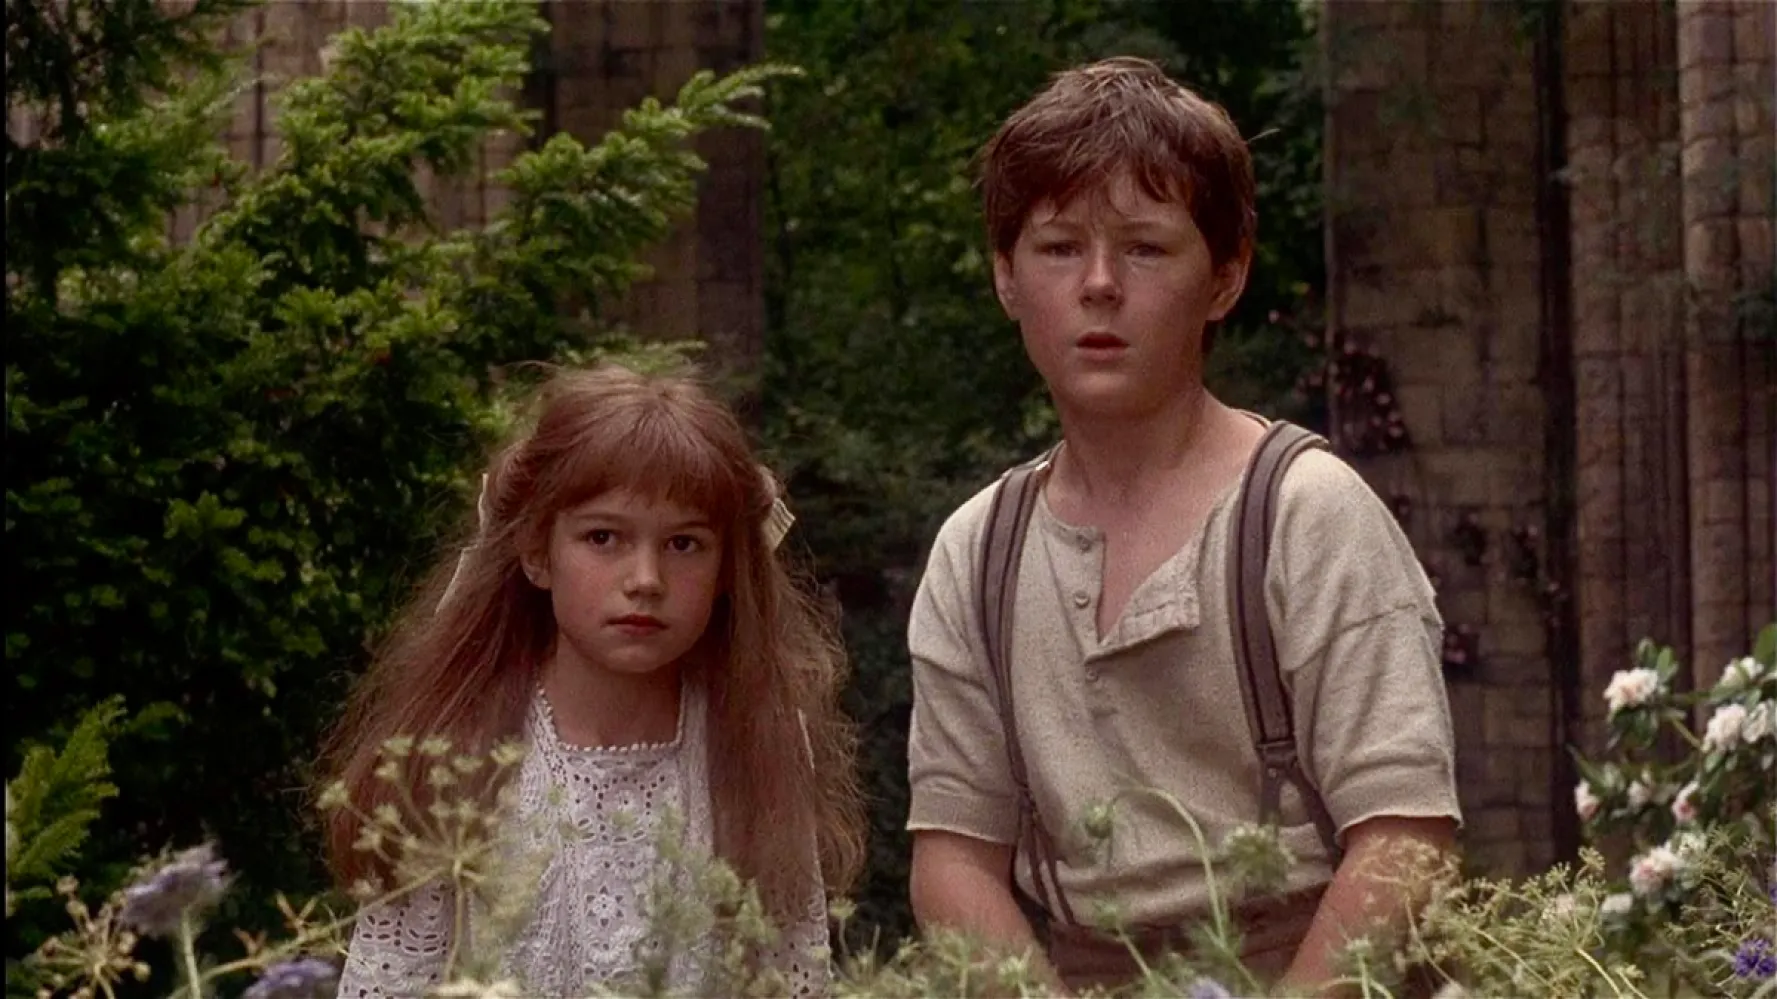 Mary and Dickon in the garden, from the 1993 movie The Secret Garden.